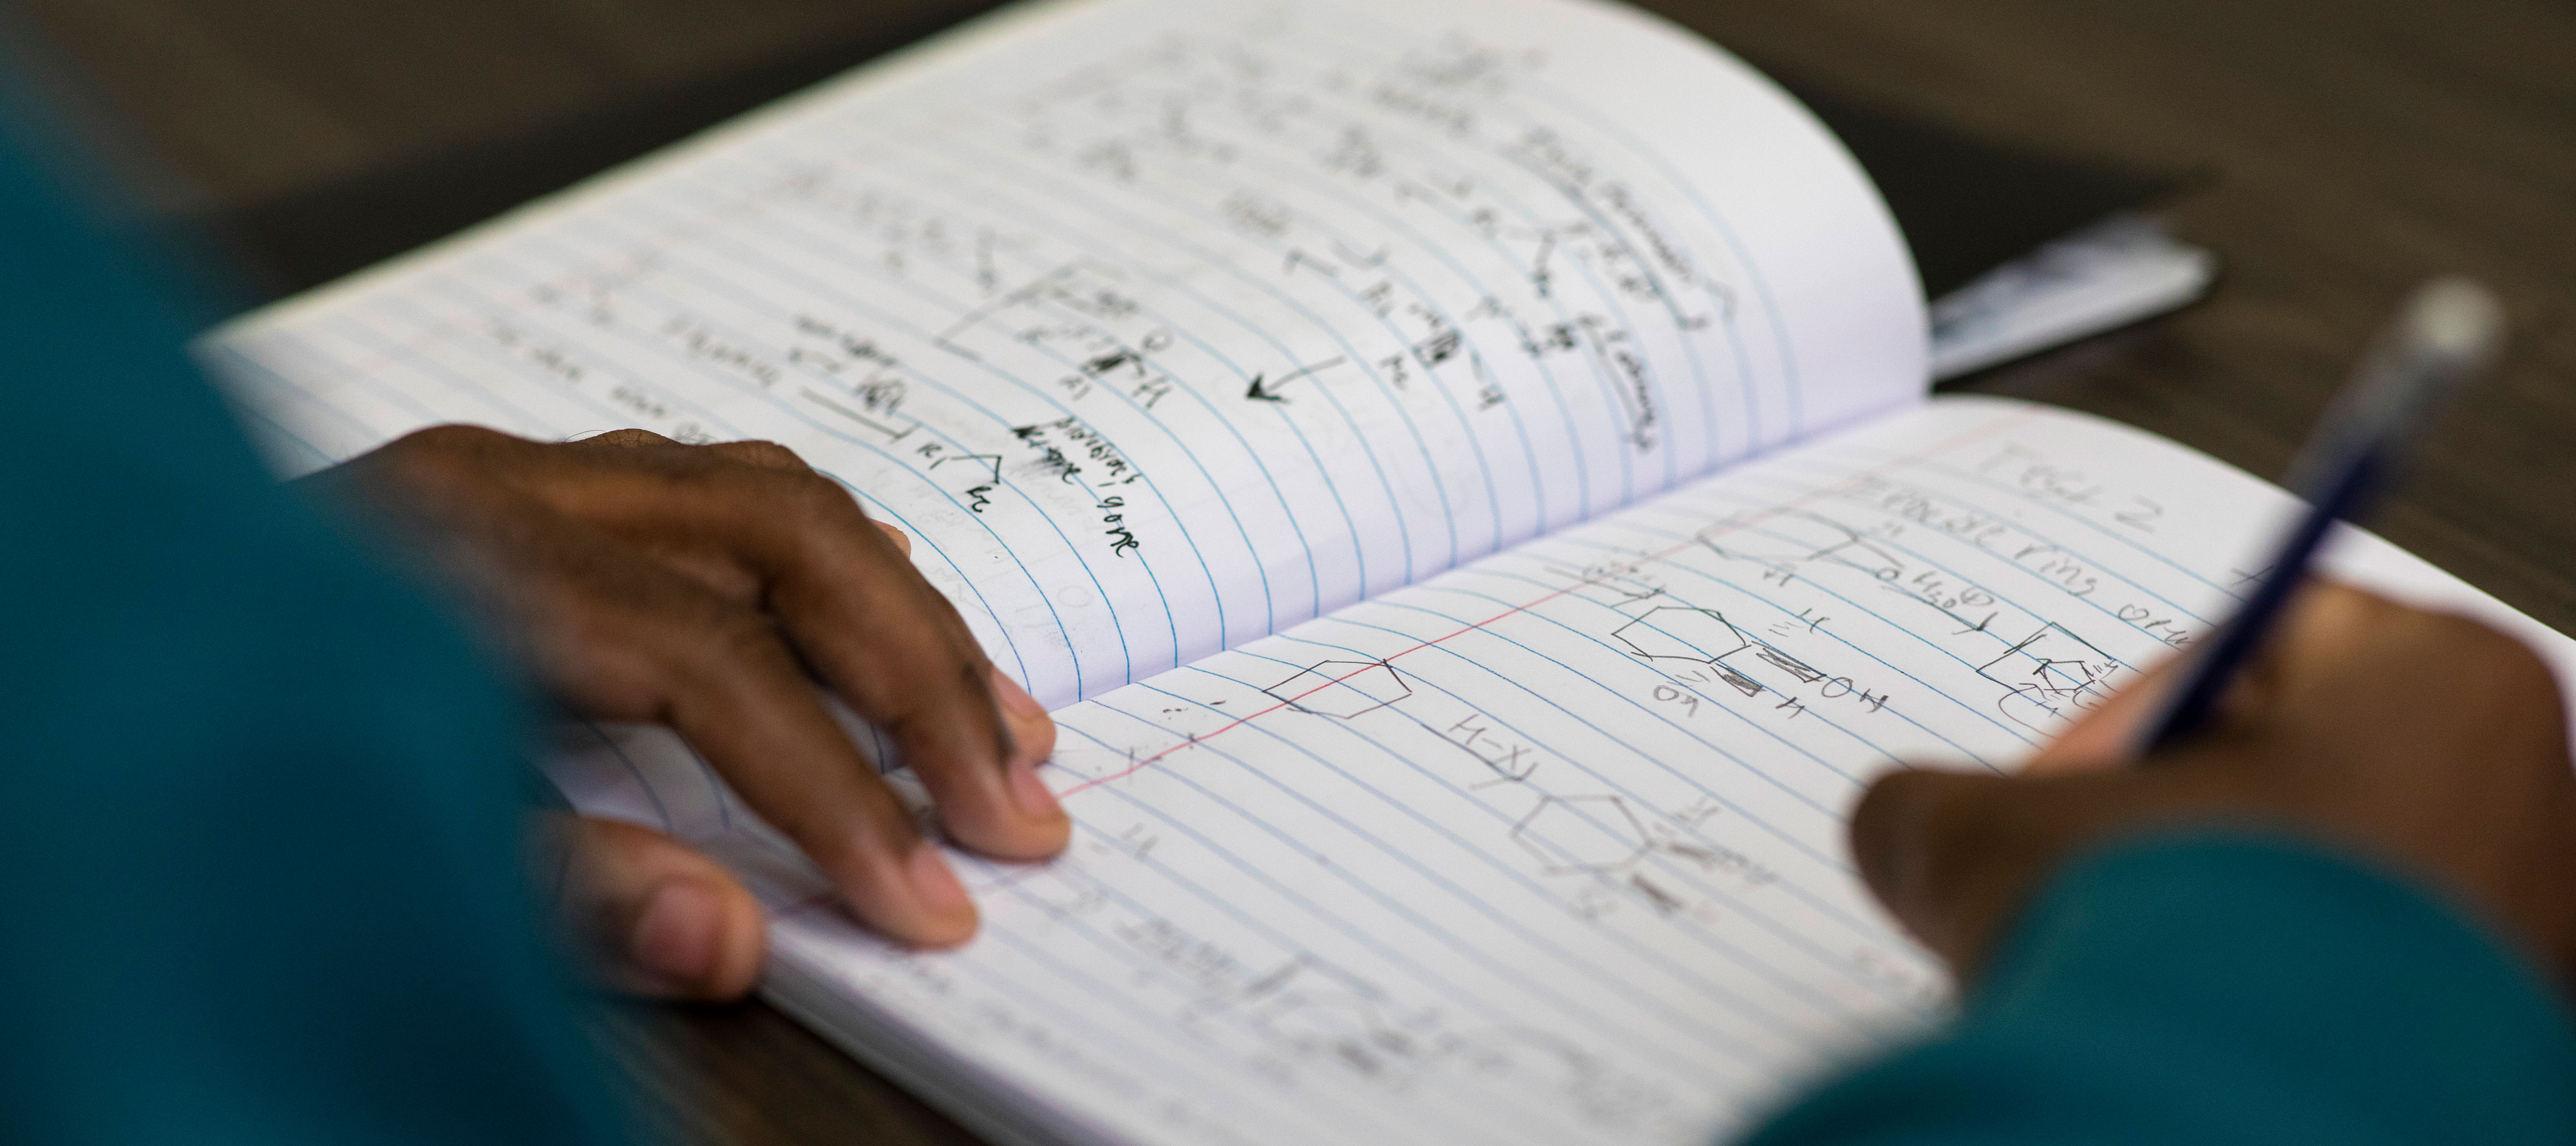 A student writes in a notebook that contains STEM notes and equations.